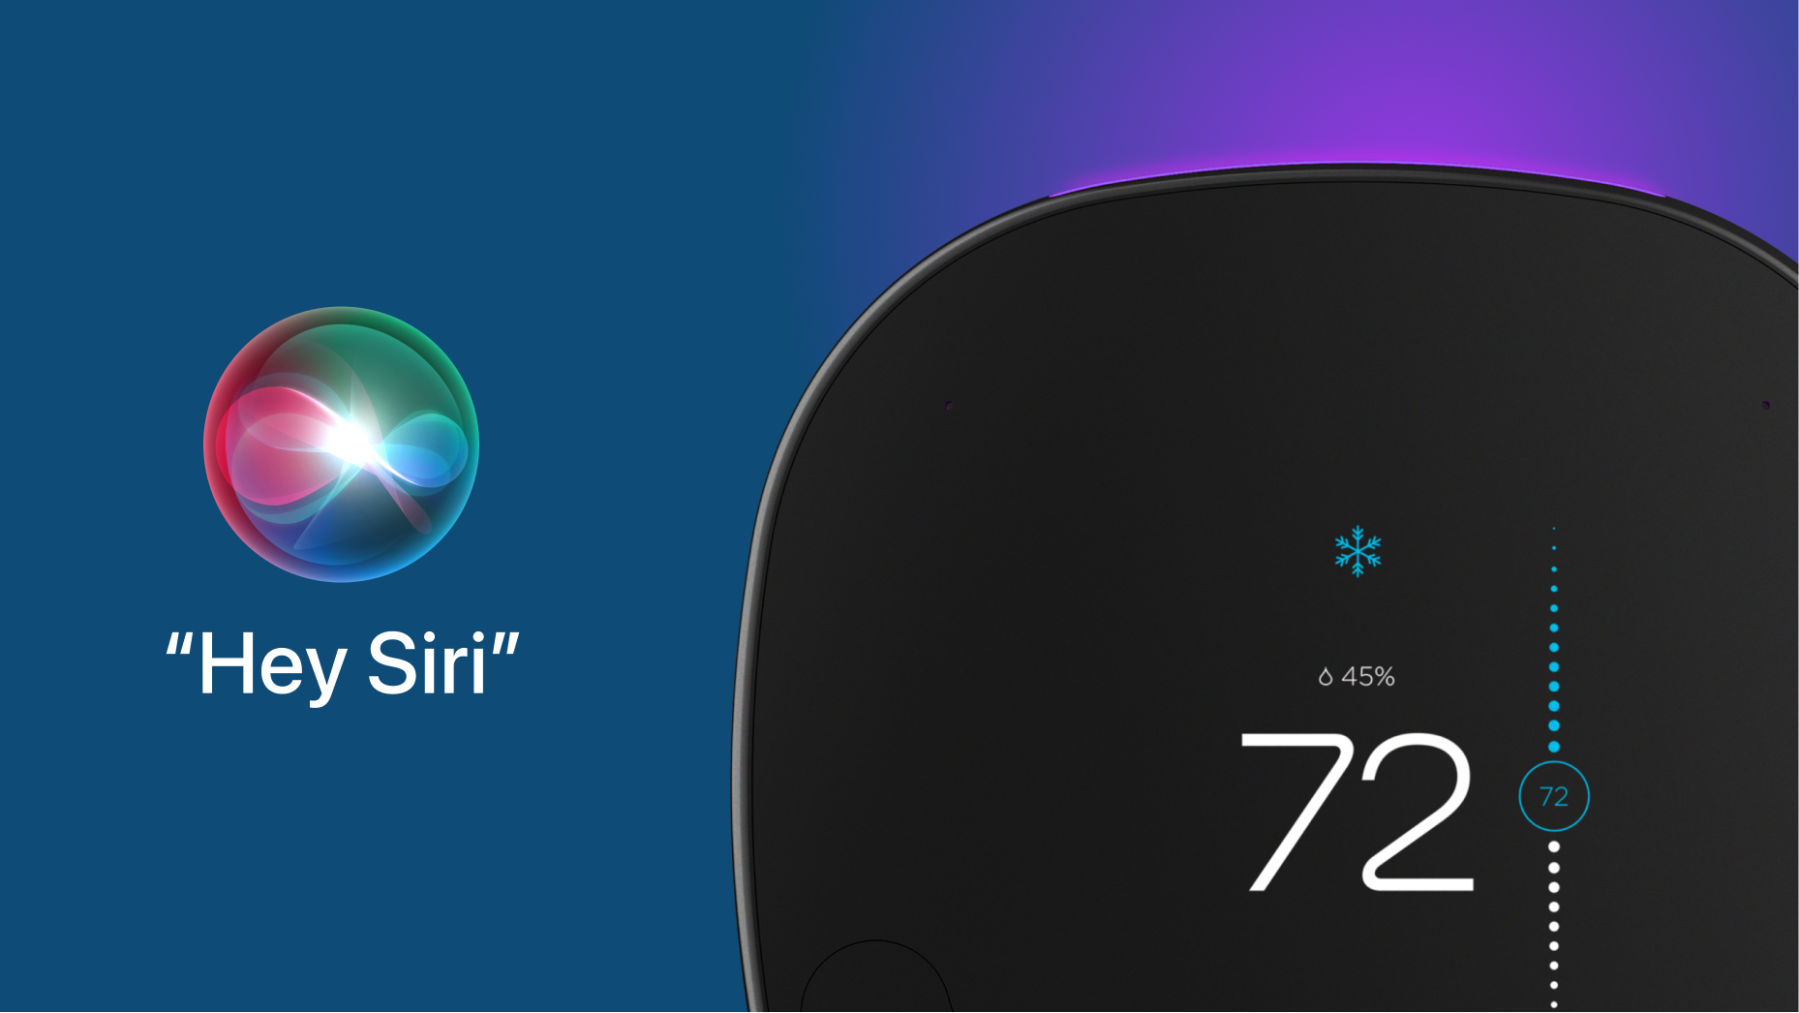 Image ecobee SmartThermostat with voice control and blind Siri with "Hi Siri". 